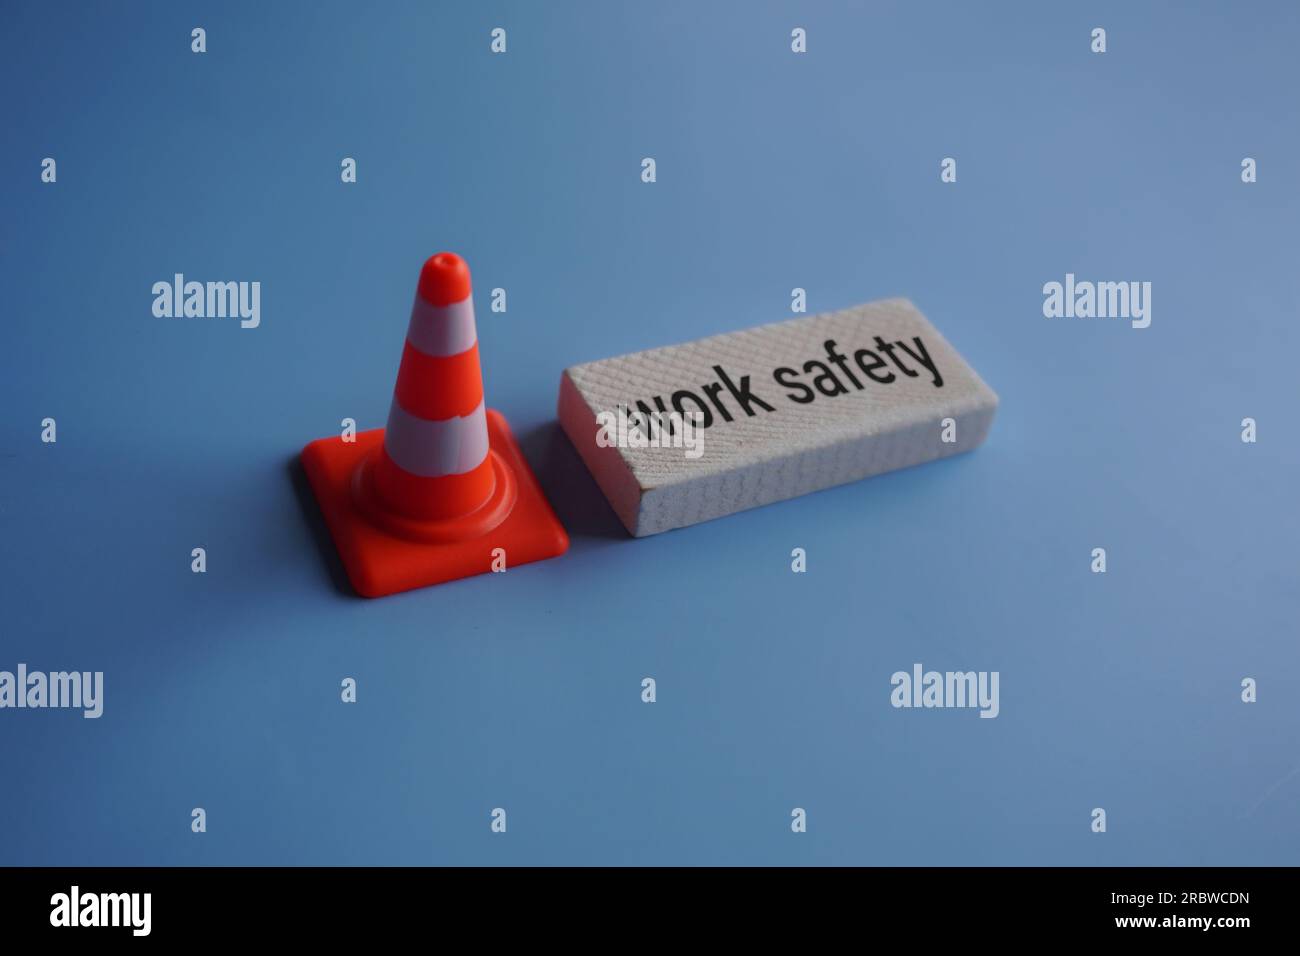 Traffic safety cone and text WORK SAFETY on blue background. Safety at workplace concept Stock Photo